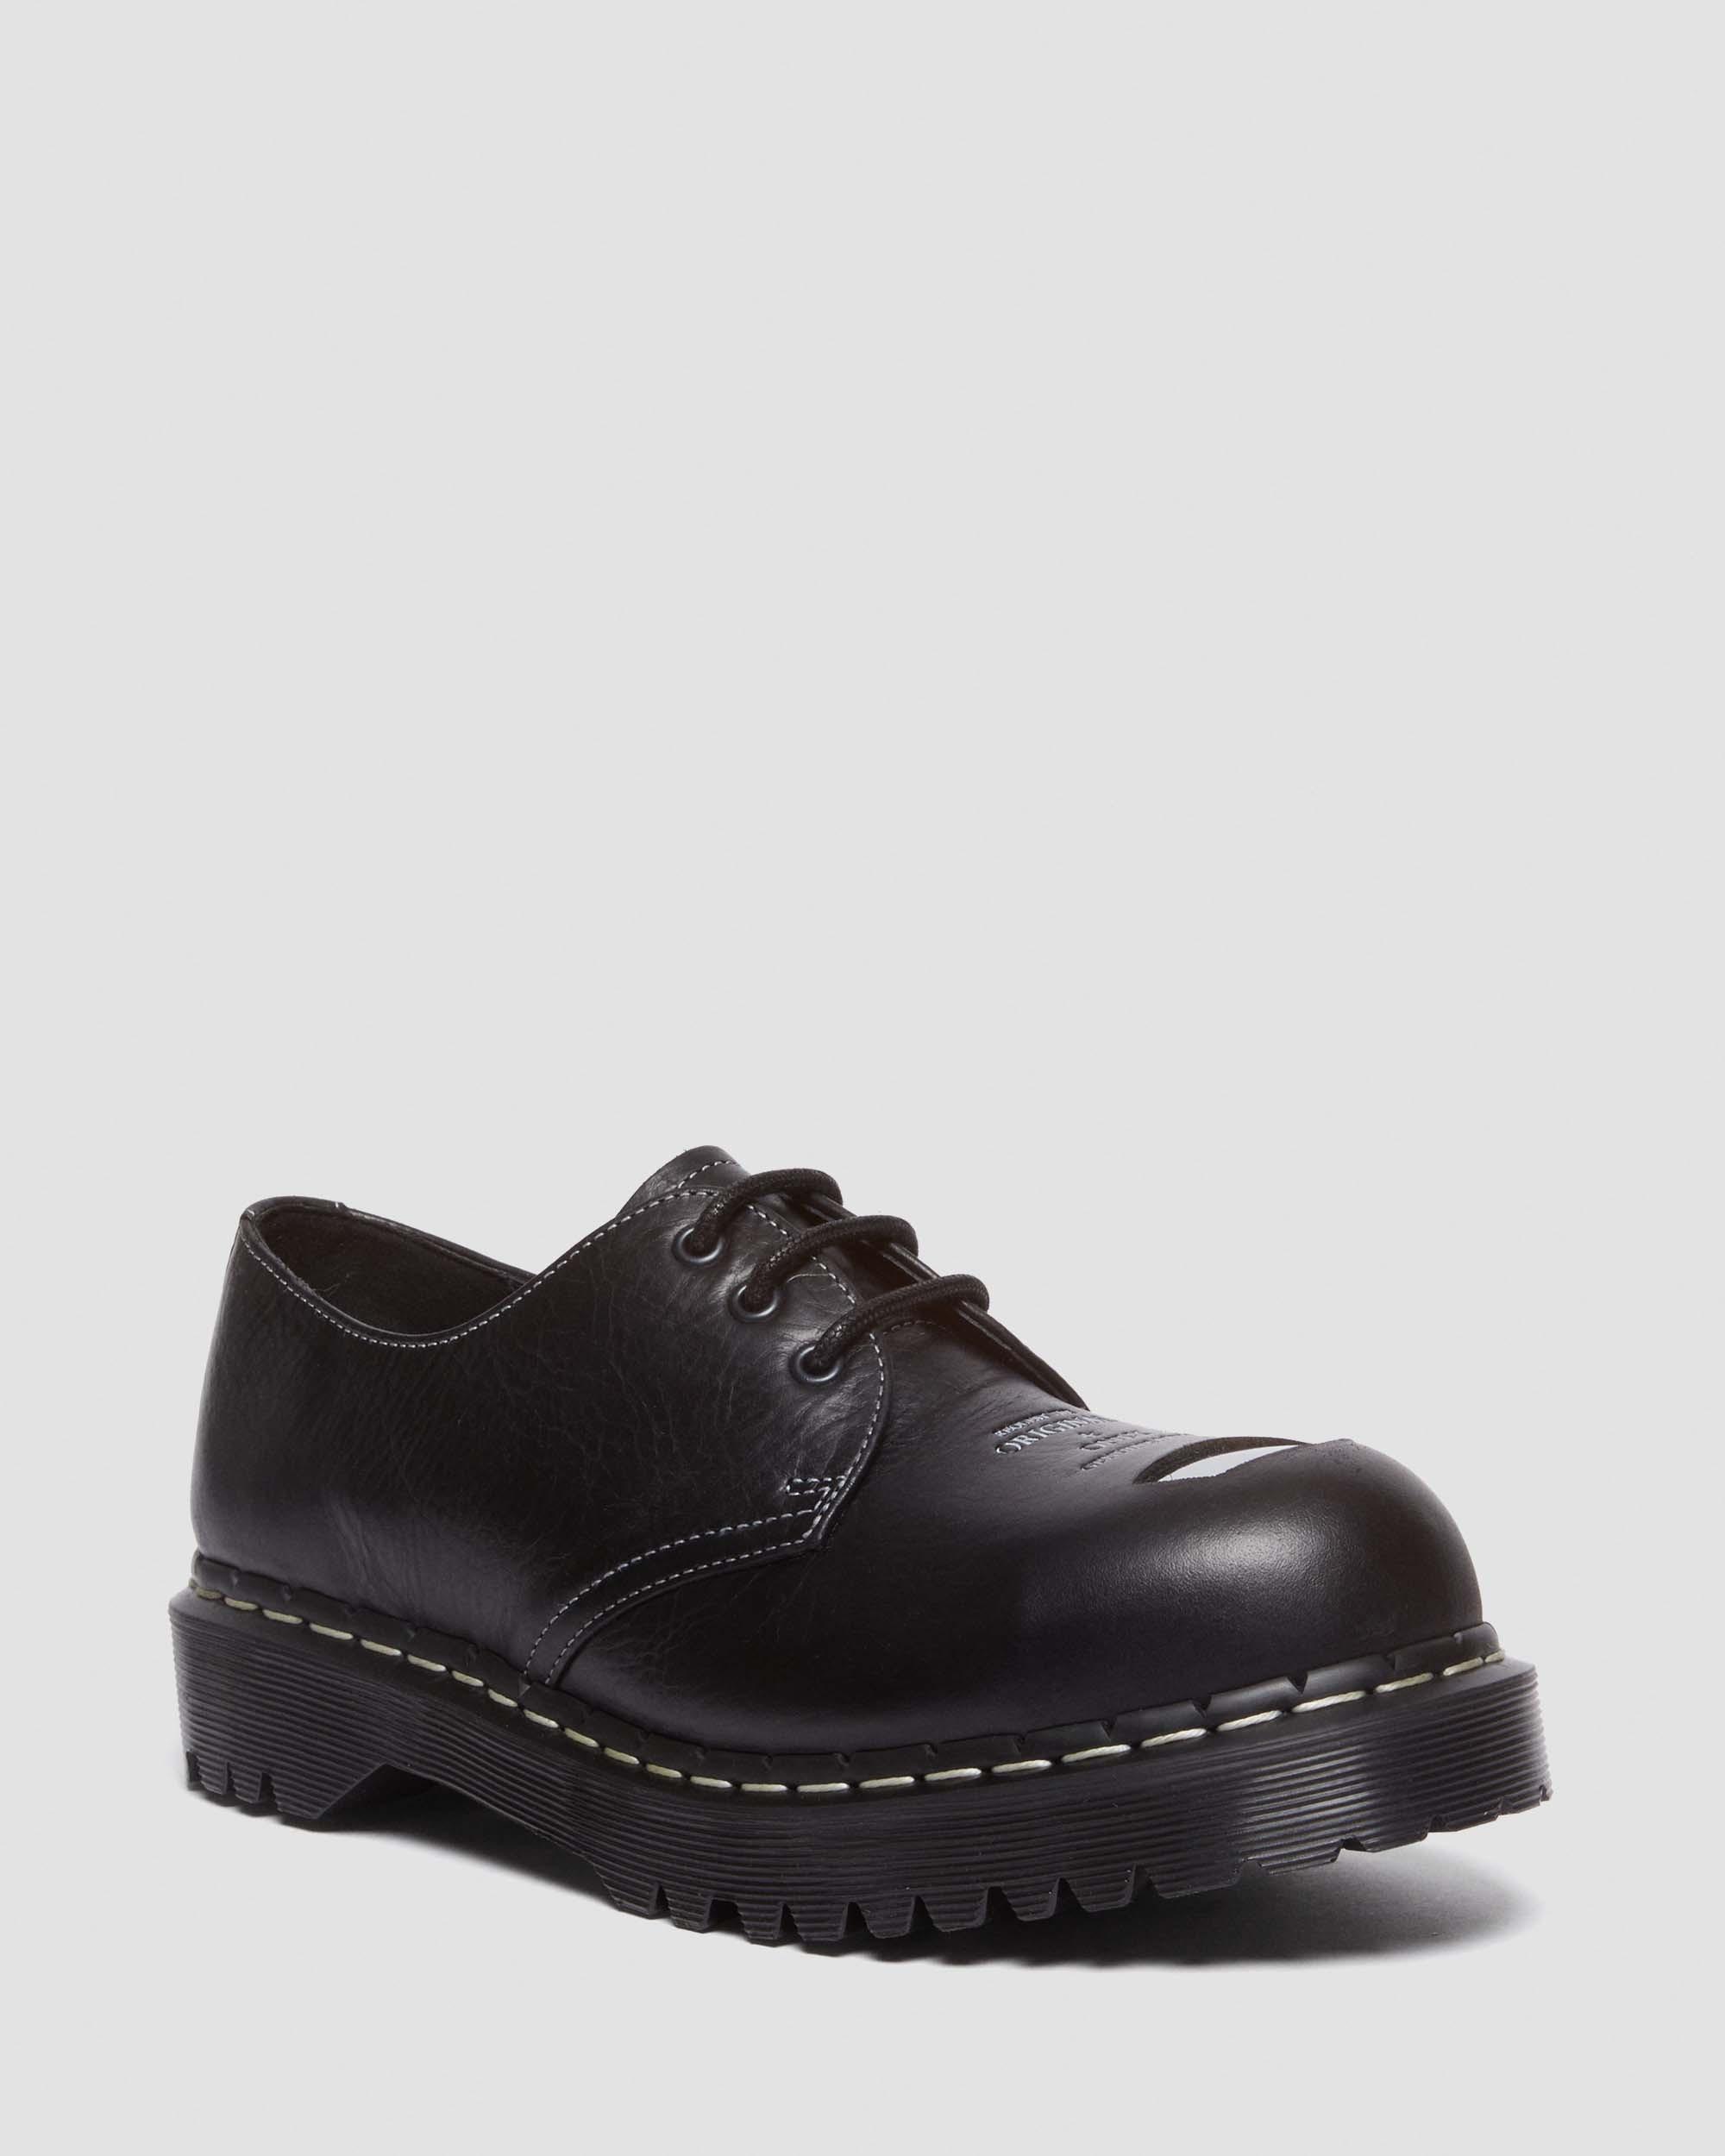 1461 Bex Exposed Steel Toe Oxford Shoes